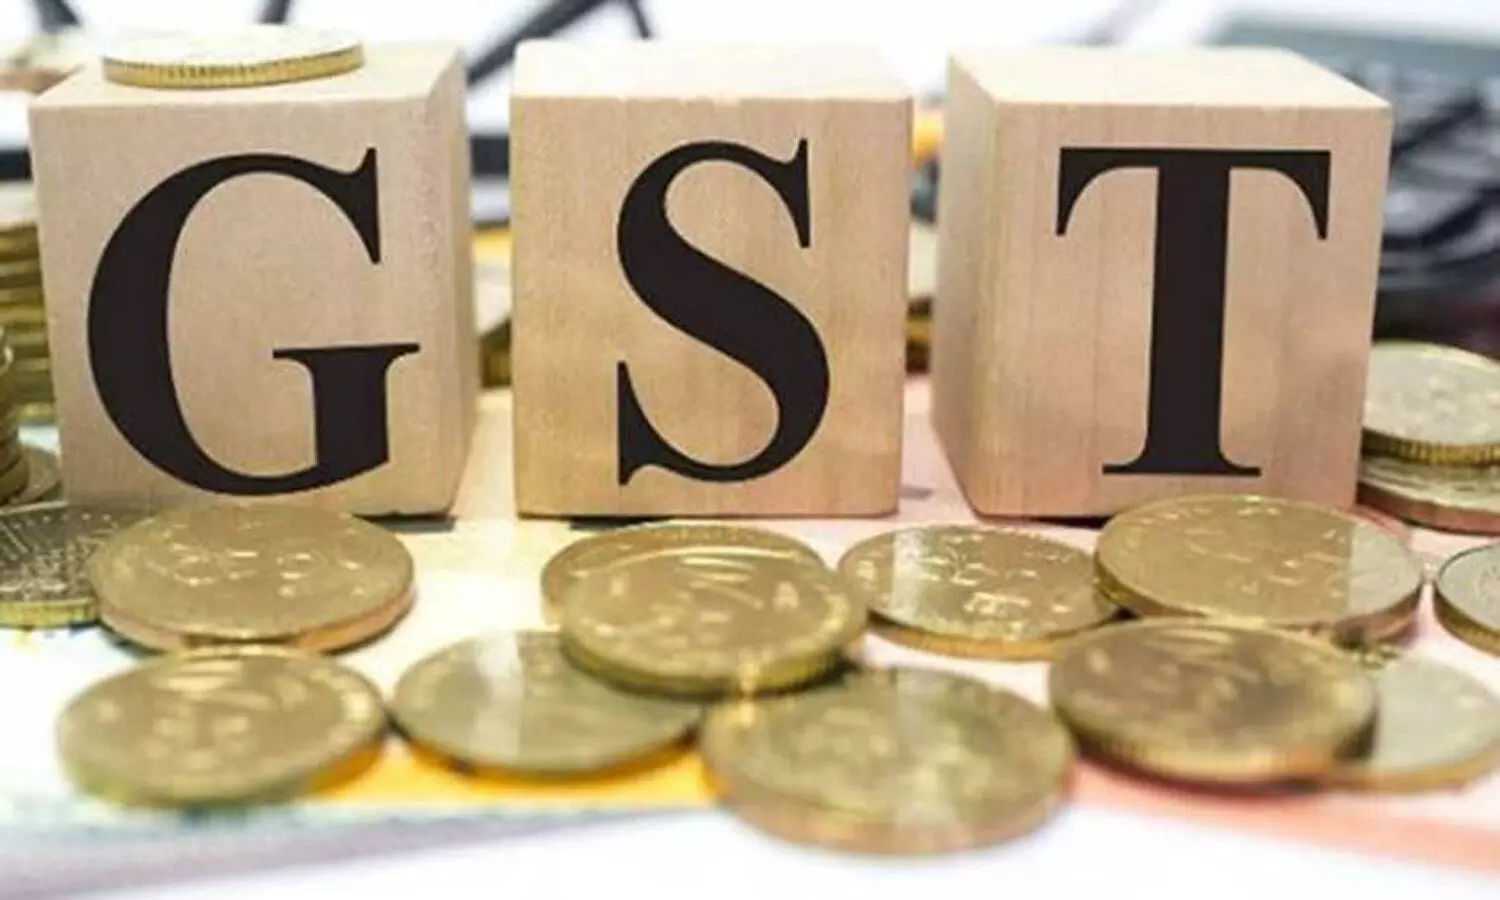 GST Return Filings Surge by 65% in 5 Years: A Boost in Taxpayer Compliance